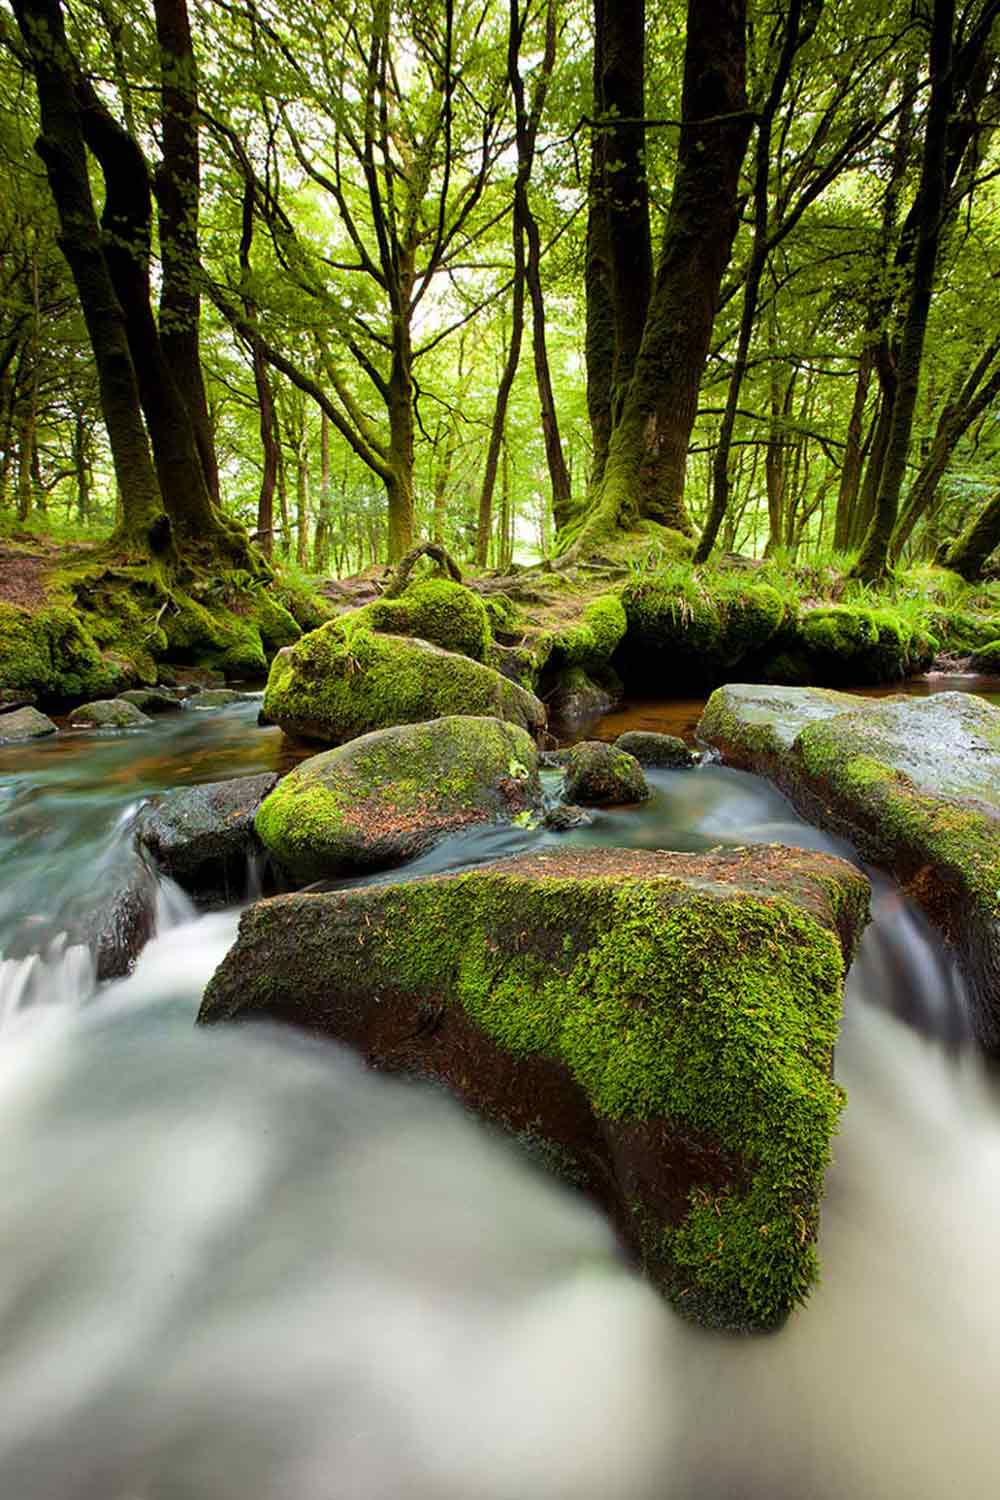 Long exposure image of a stream running through a lush green forest